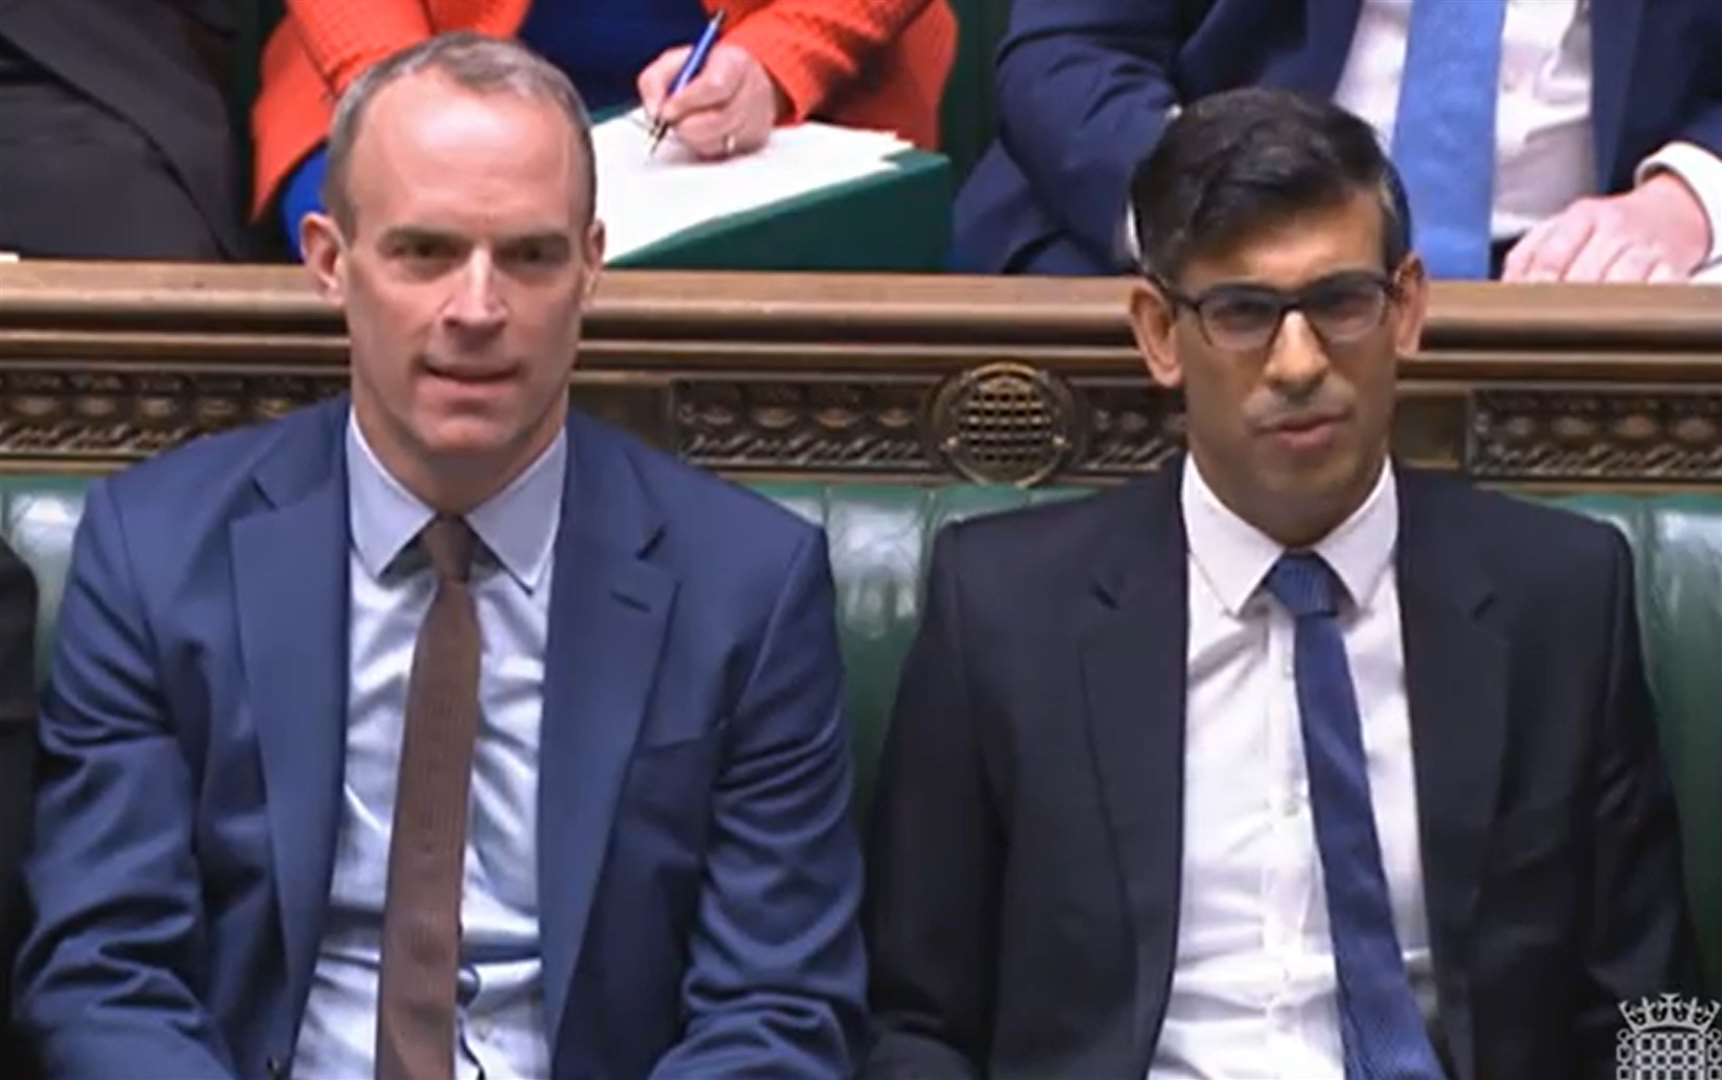 Then-deputy prime minister Dominic Raab and Prime Minister Rishi Sunak in the Commons (House of Commons/PA)